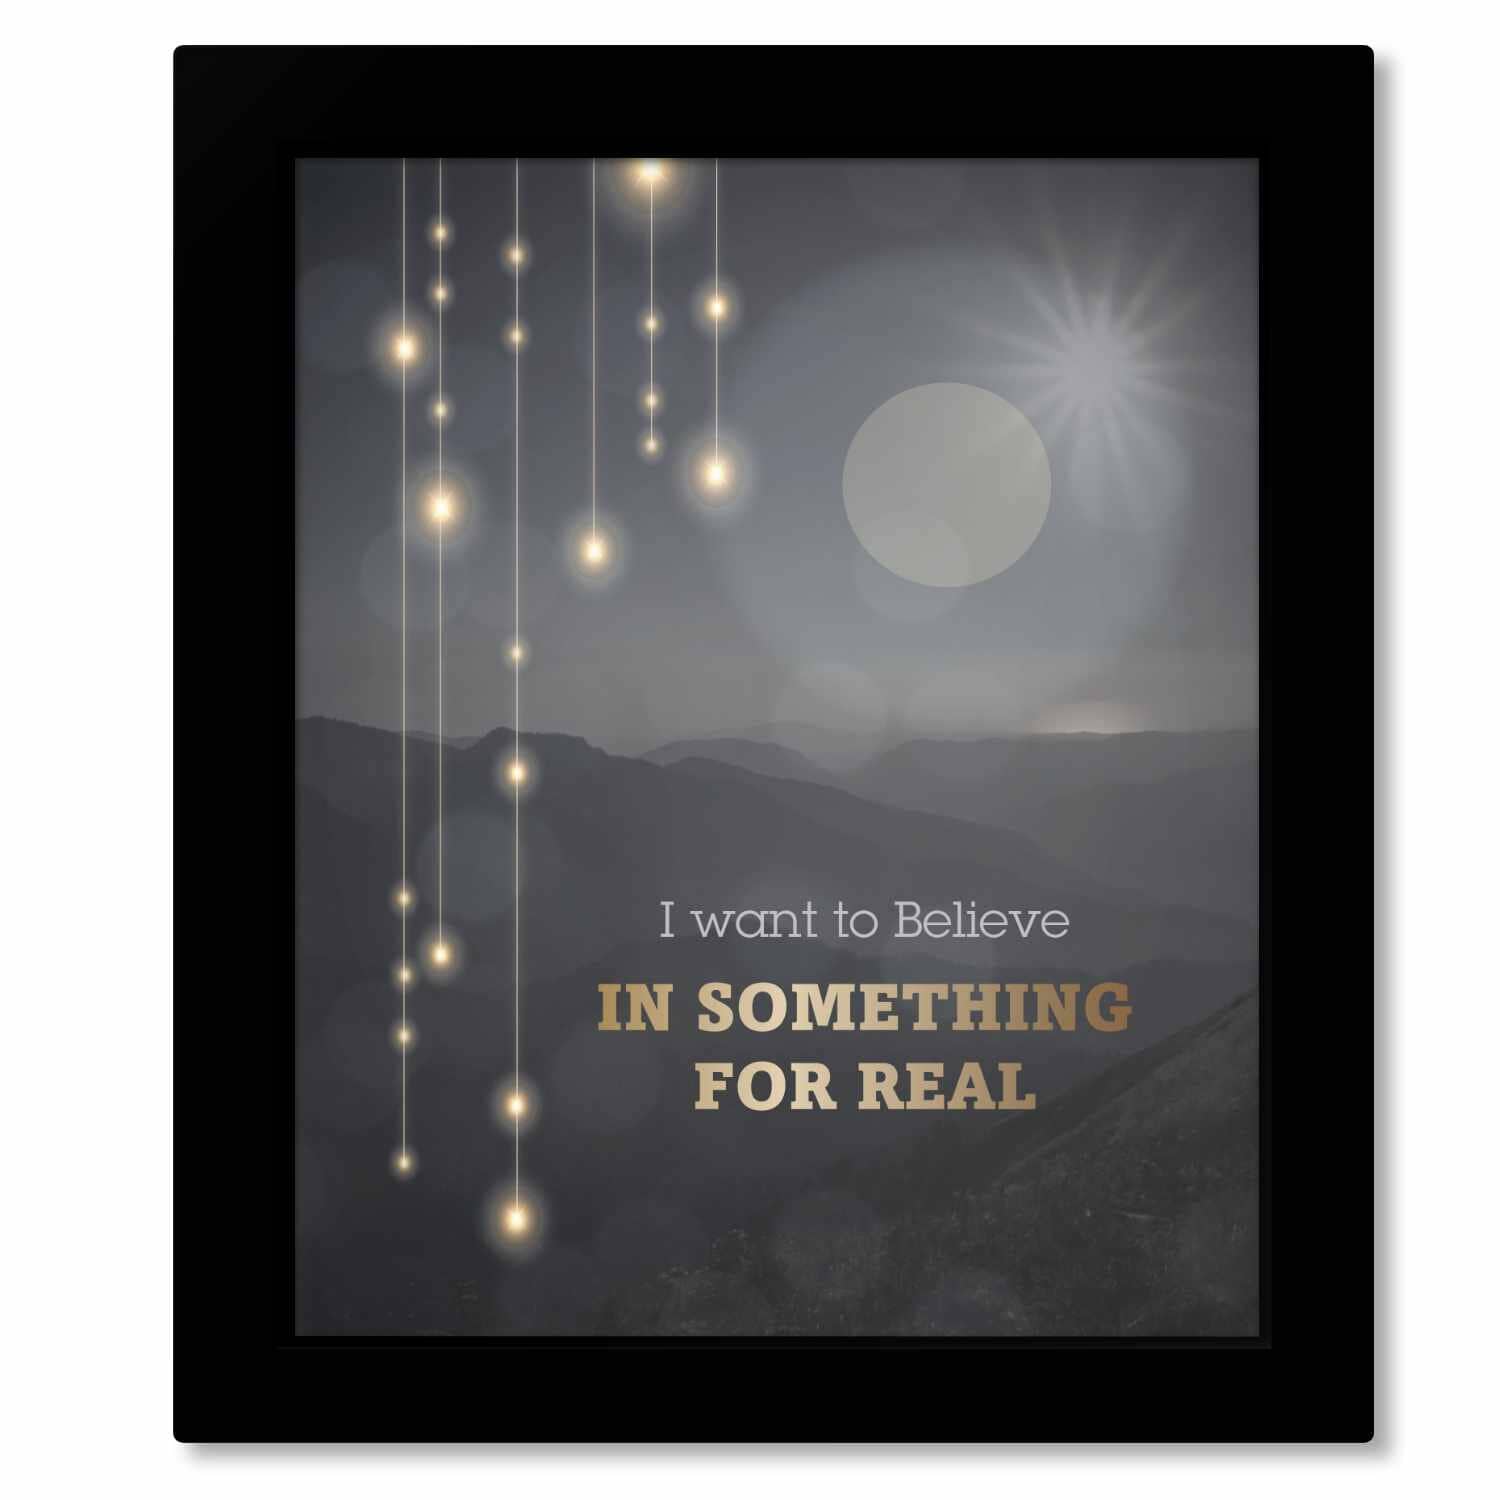 I Want to Believe by Sass Jordan - 80s Music Lyric Art Print Song Lyrics Art Song Lyrics Art 8x10 Framed Print without mat 